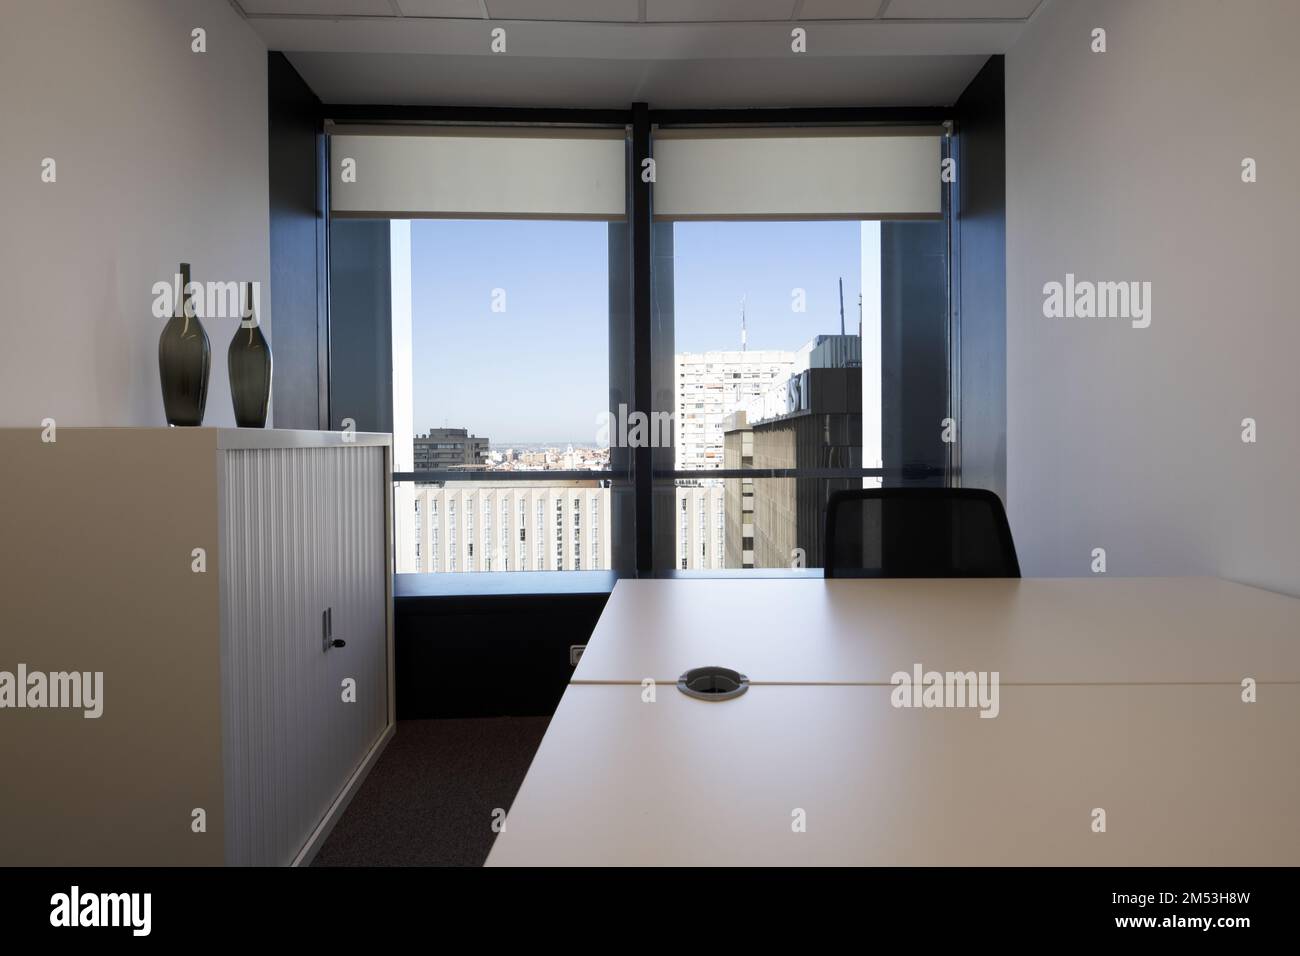 Coworking office with lockable filing cabinet, decorative glass vases and bay window with views Stock Photo